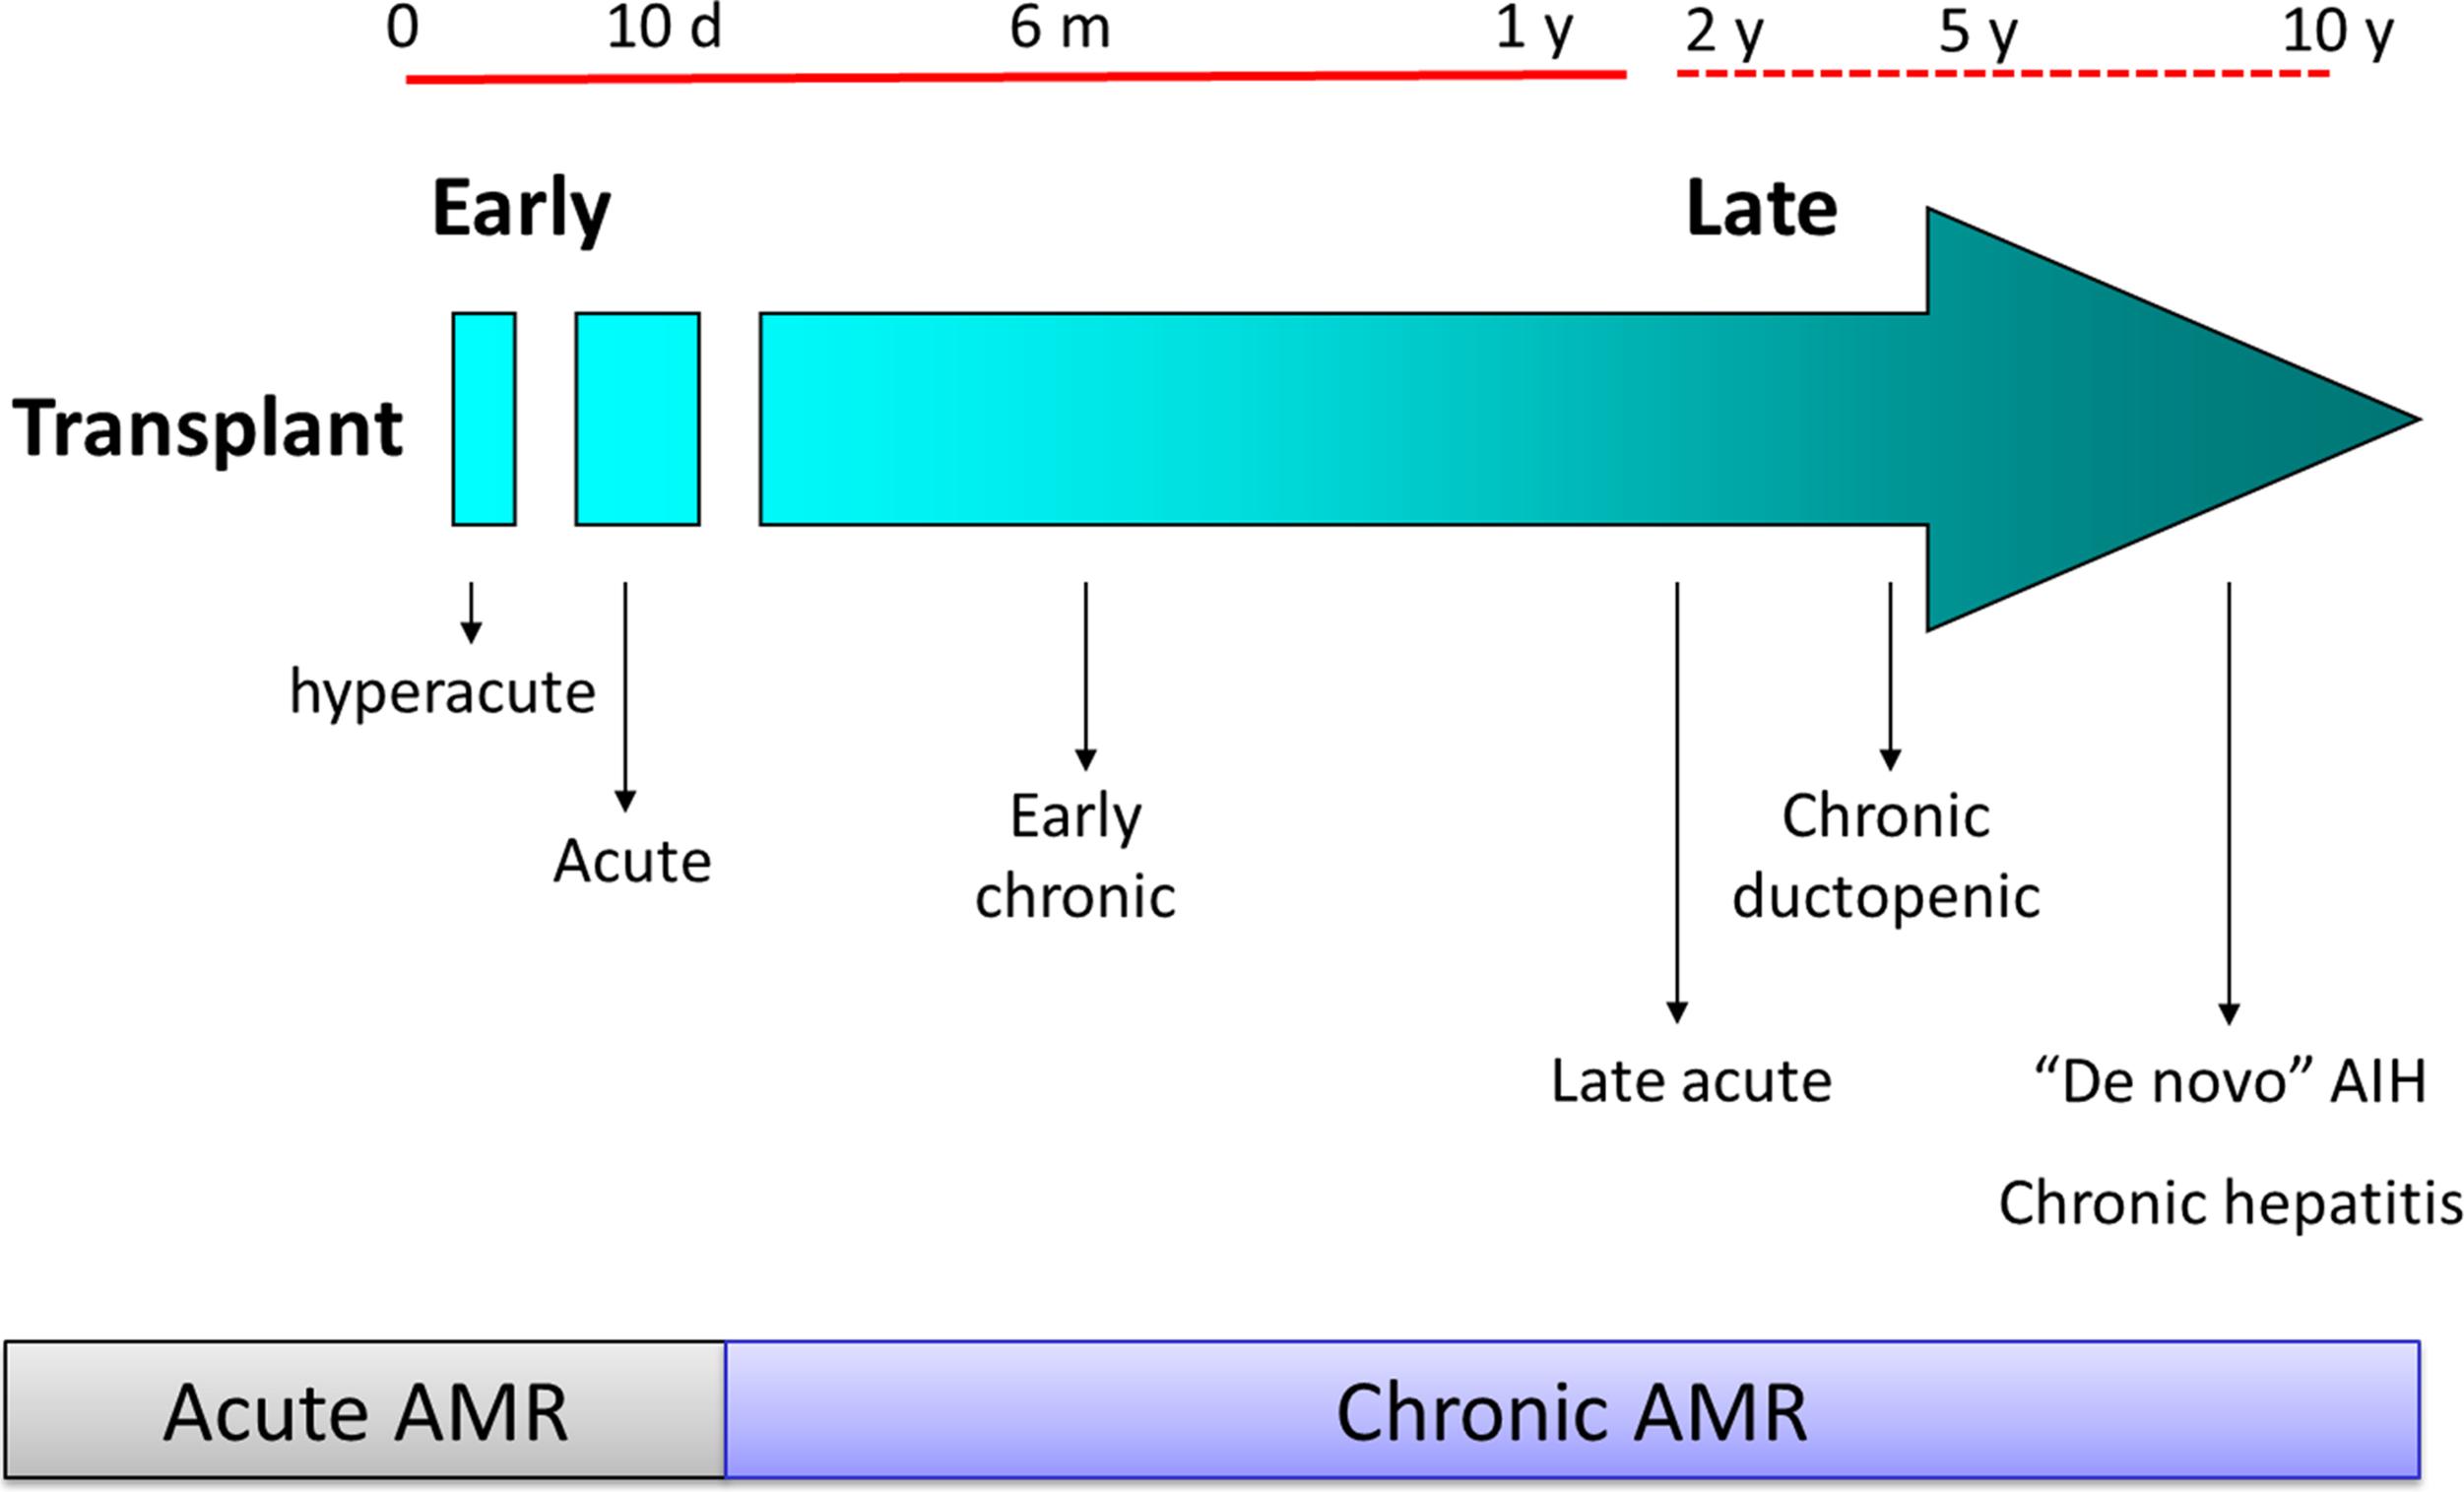 Fig. 22.2, Timing of different types of rejection after pediatric liver transplantation. AIH, Autoimmune hepatitis; AMR, antibody-mediated rejection.